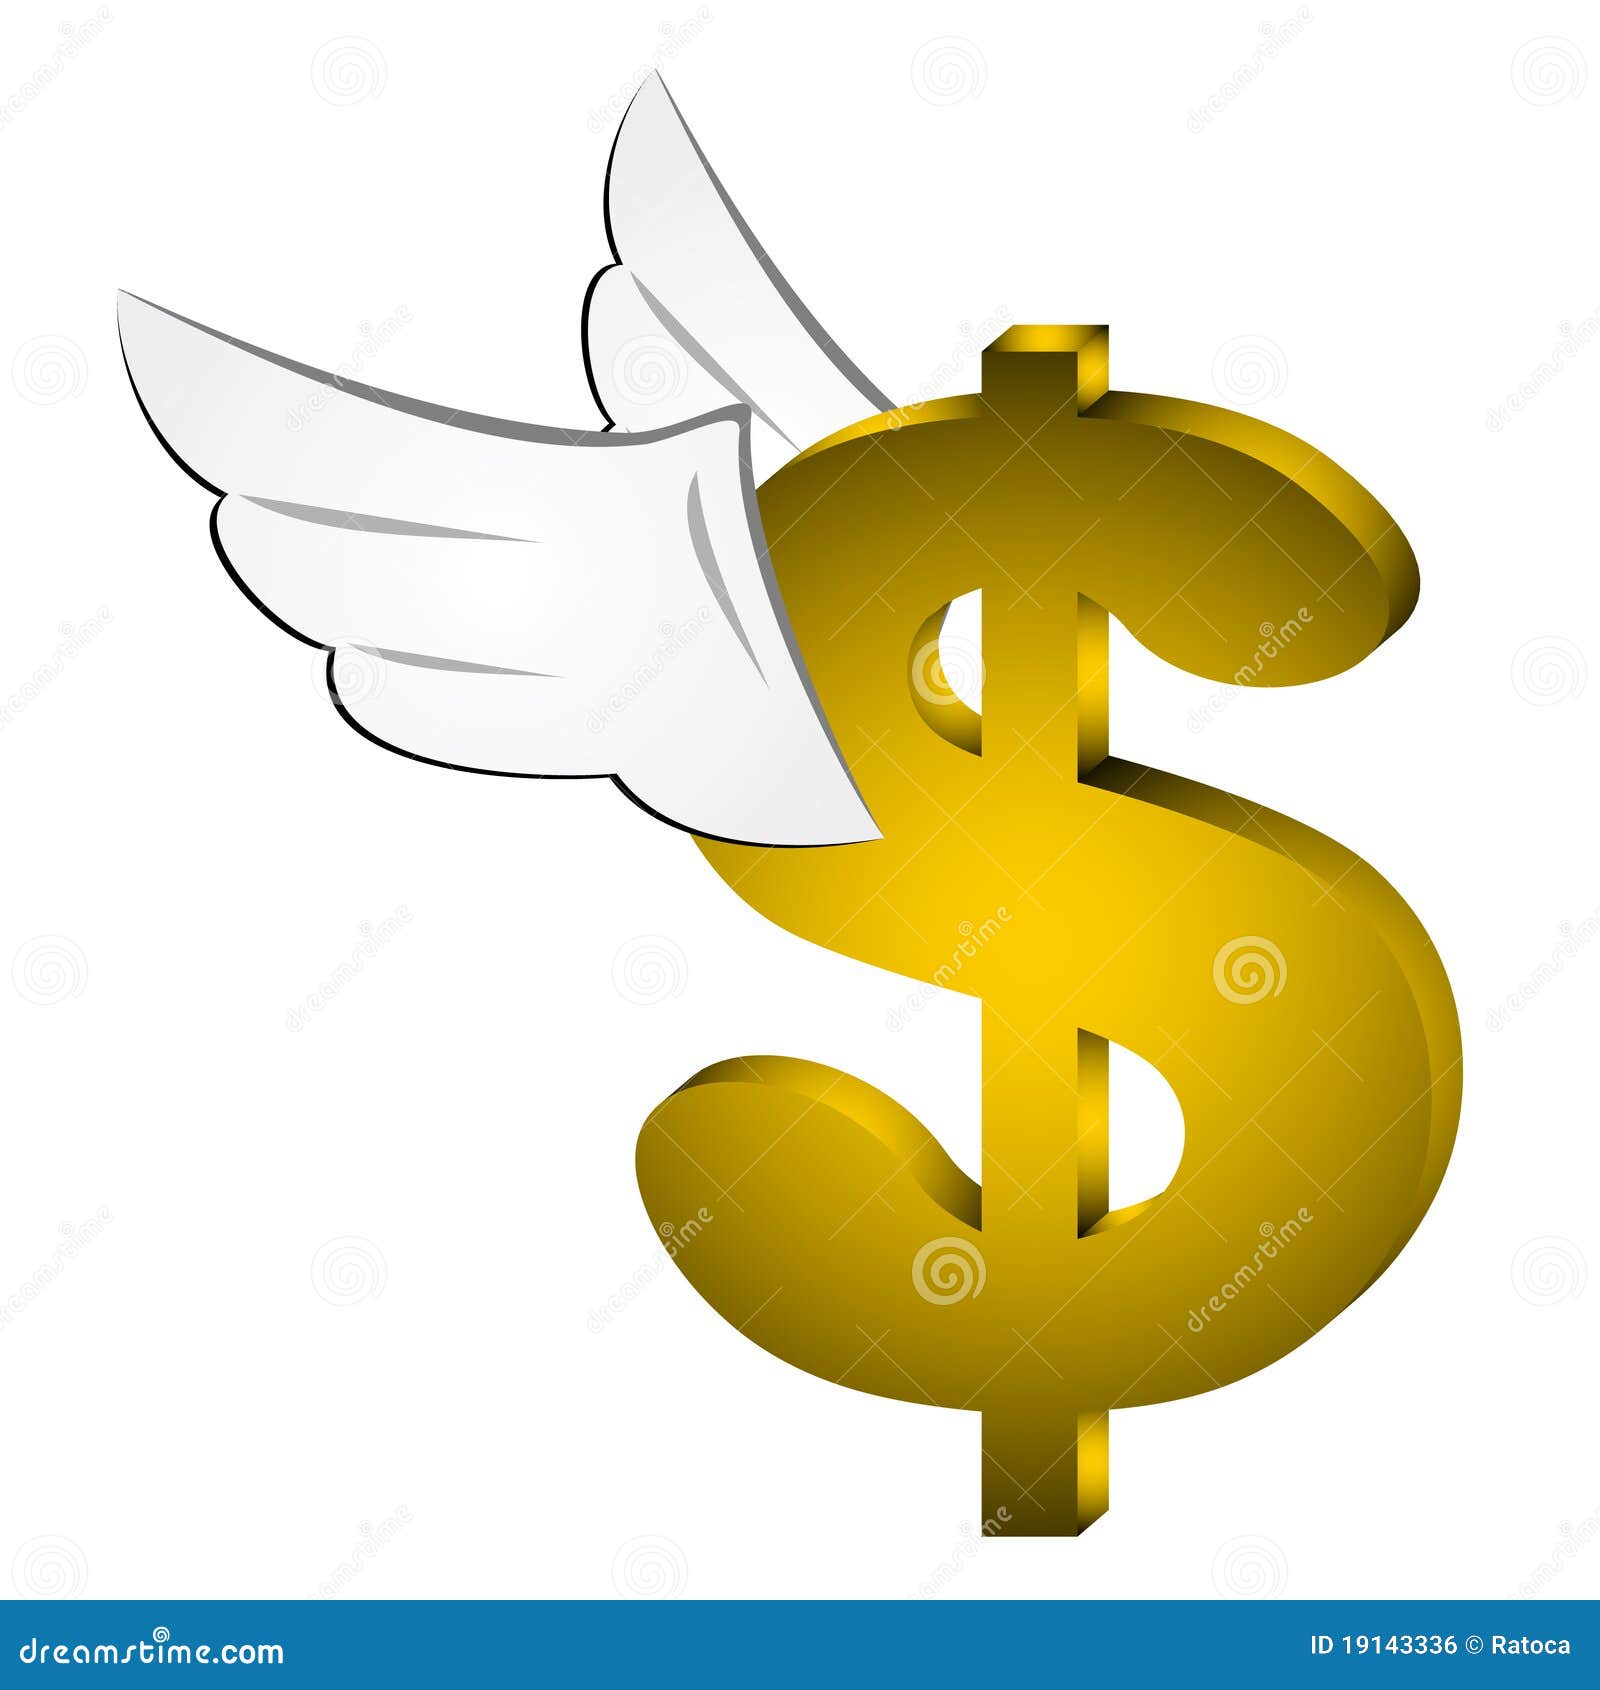 clipart money flying away - photo #17